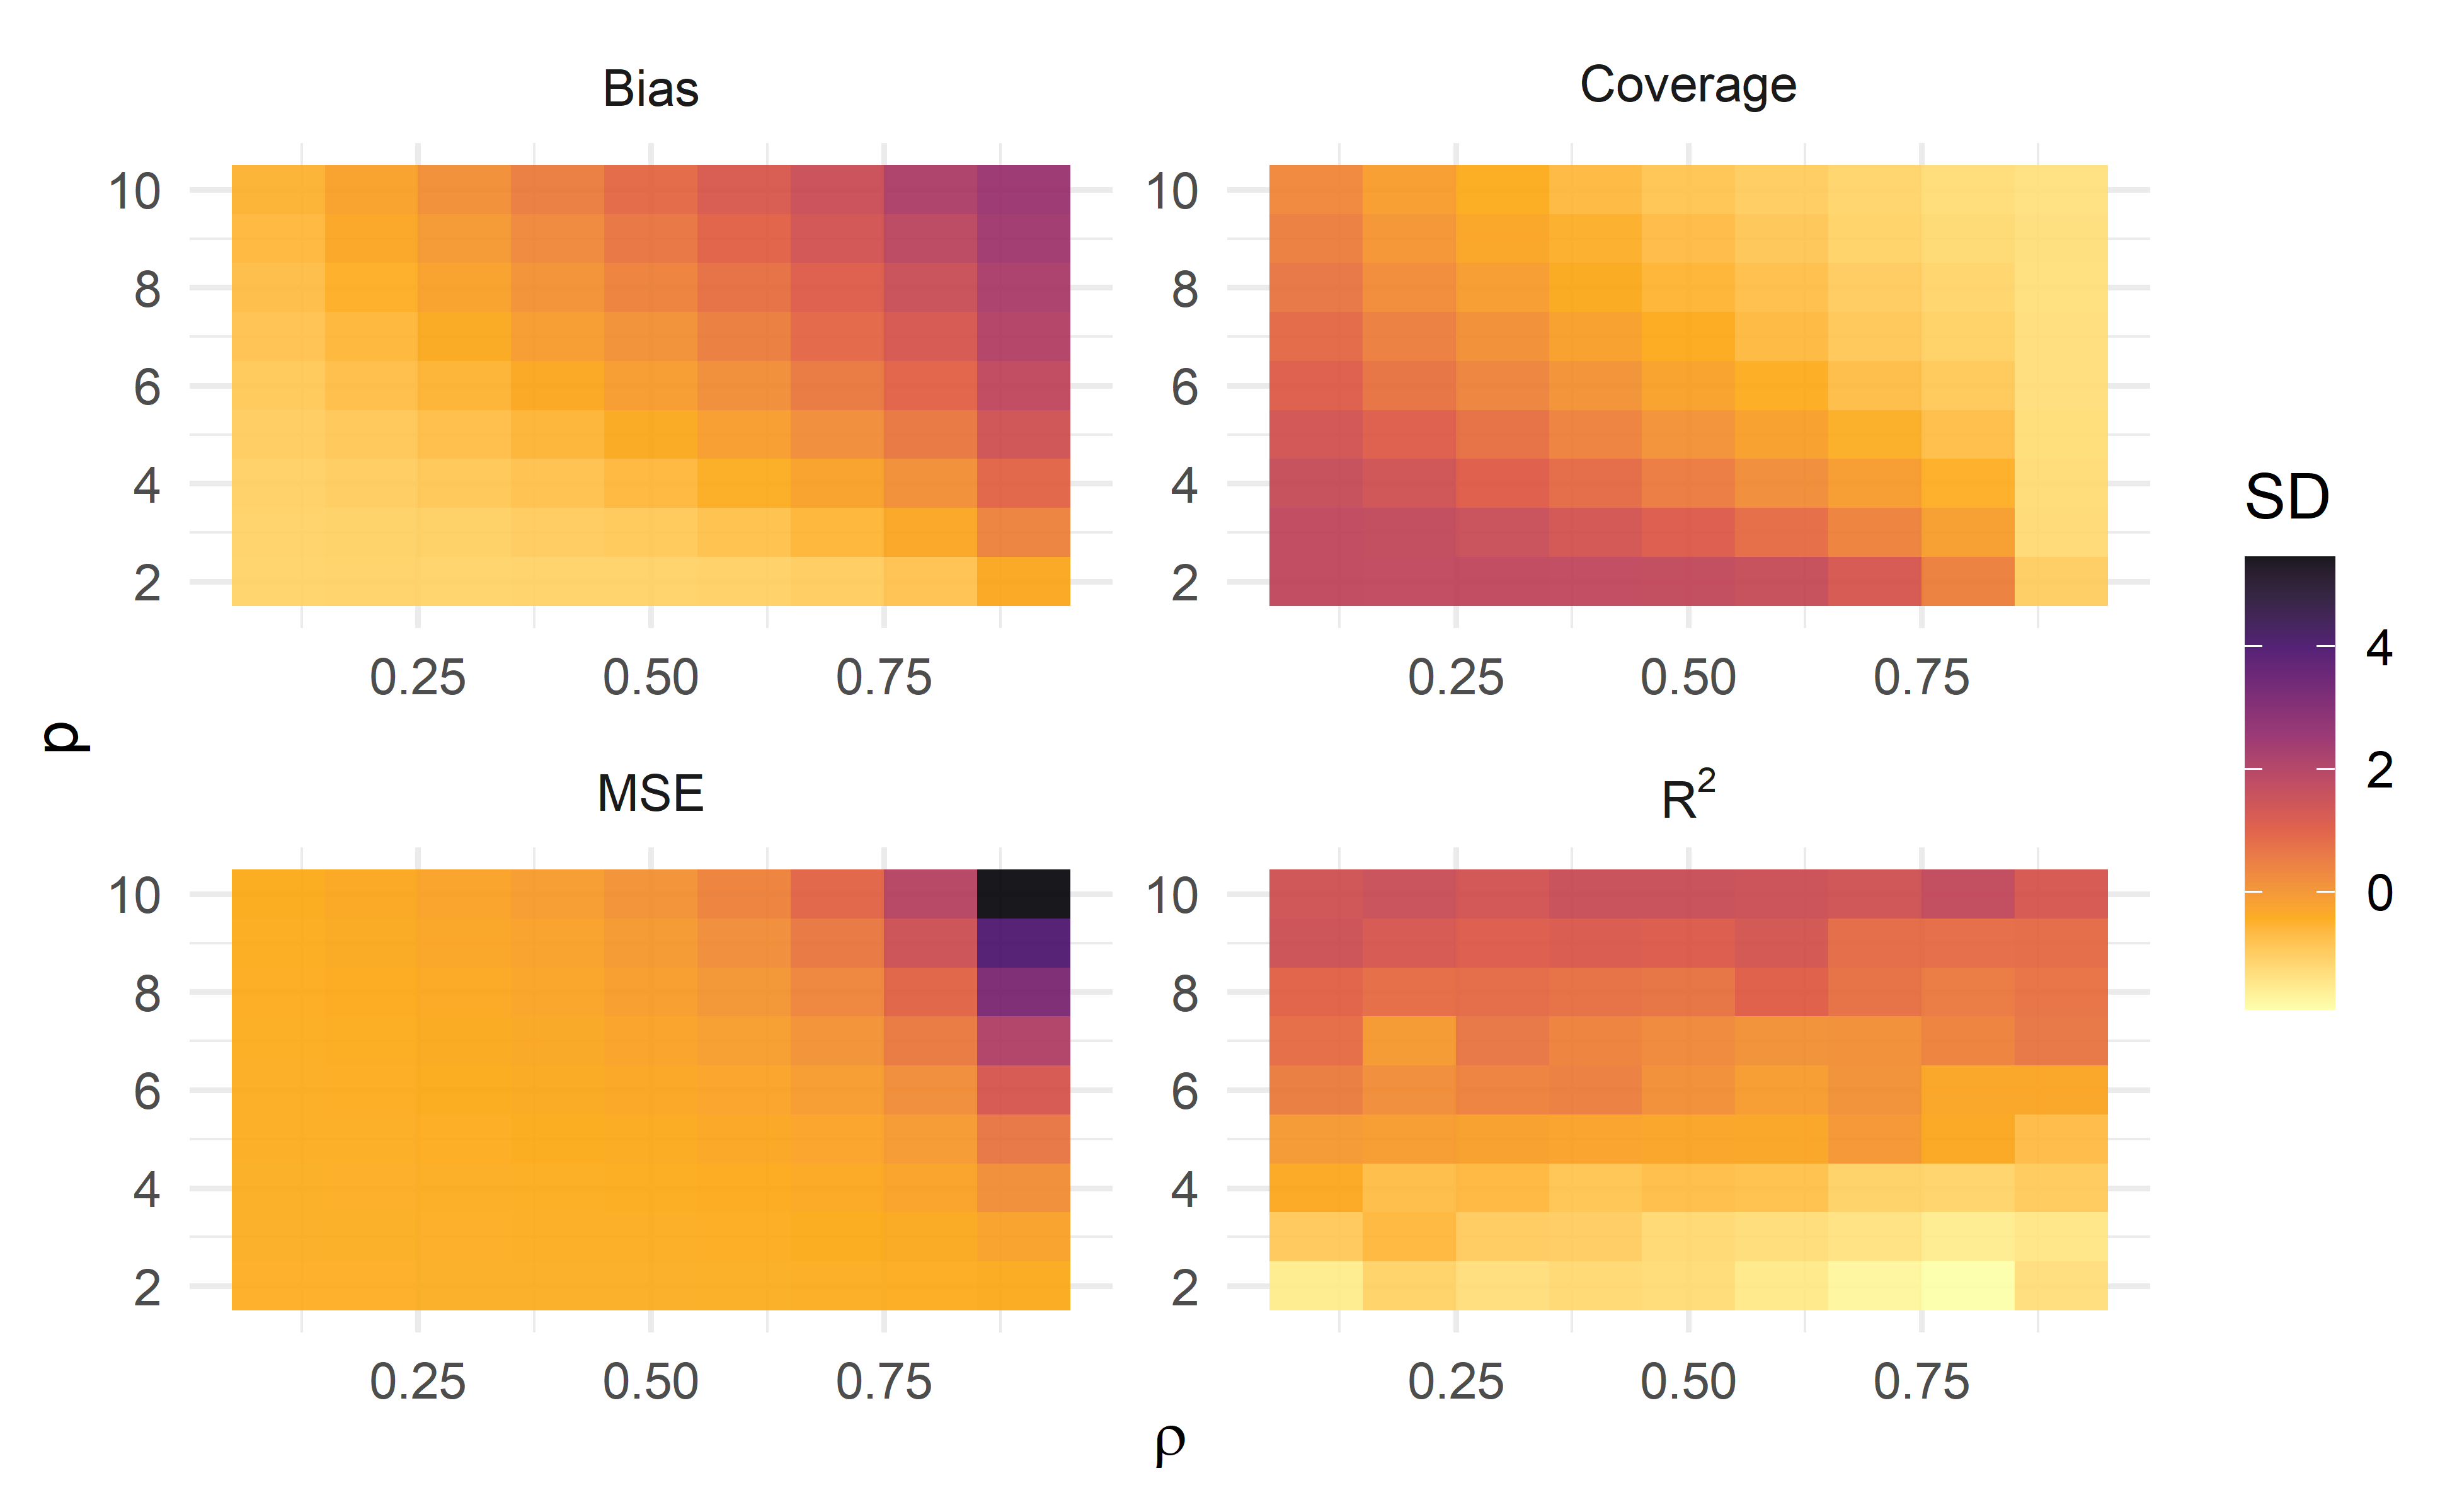 Standardized measures of Bias, Coverage, Mean Square Error (MSE) and R2, across each simulation of pairs of number of predictors and correlation values